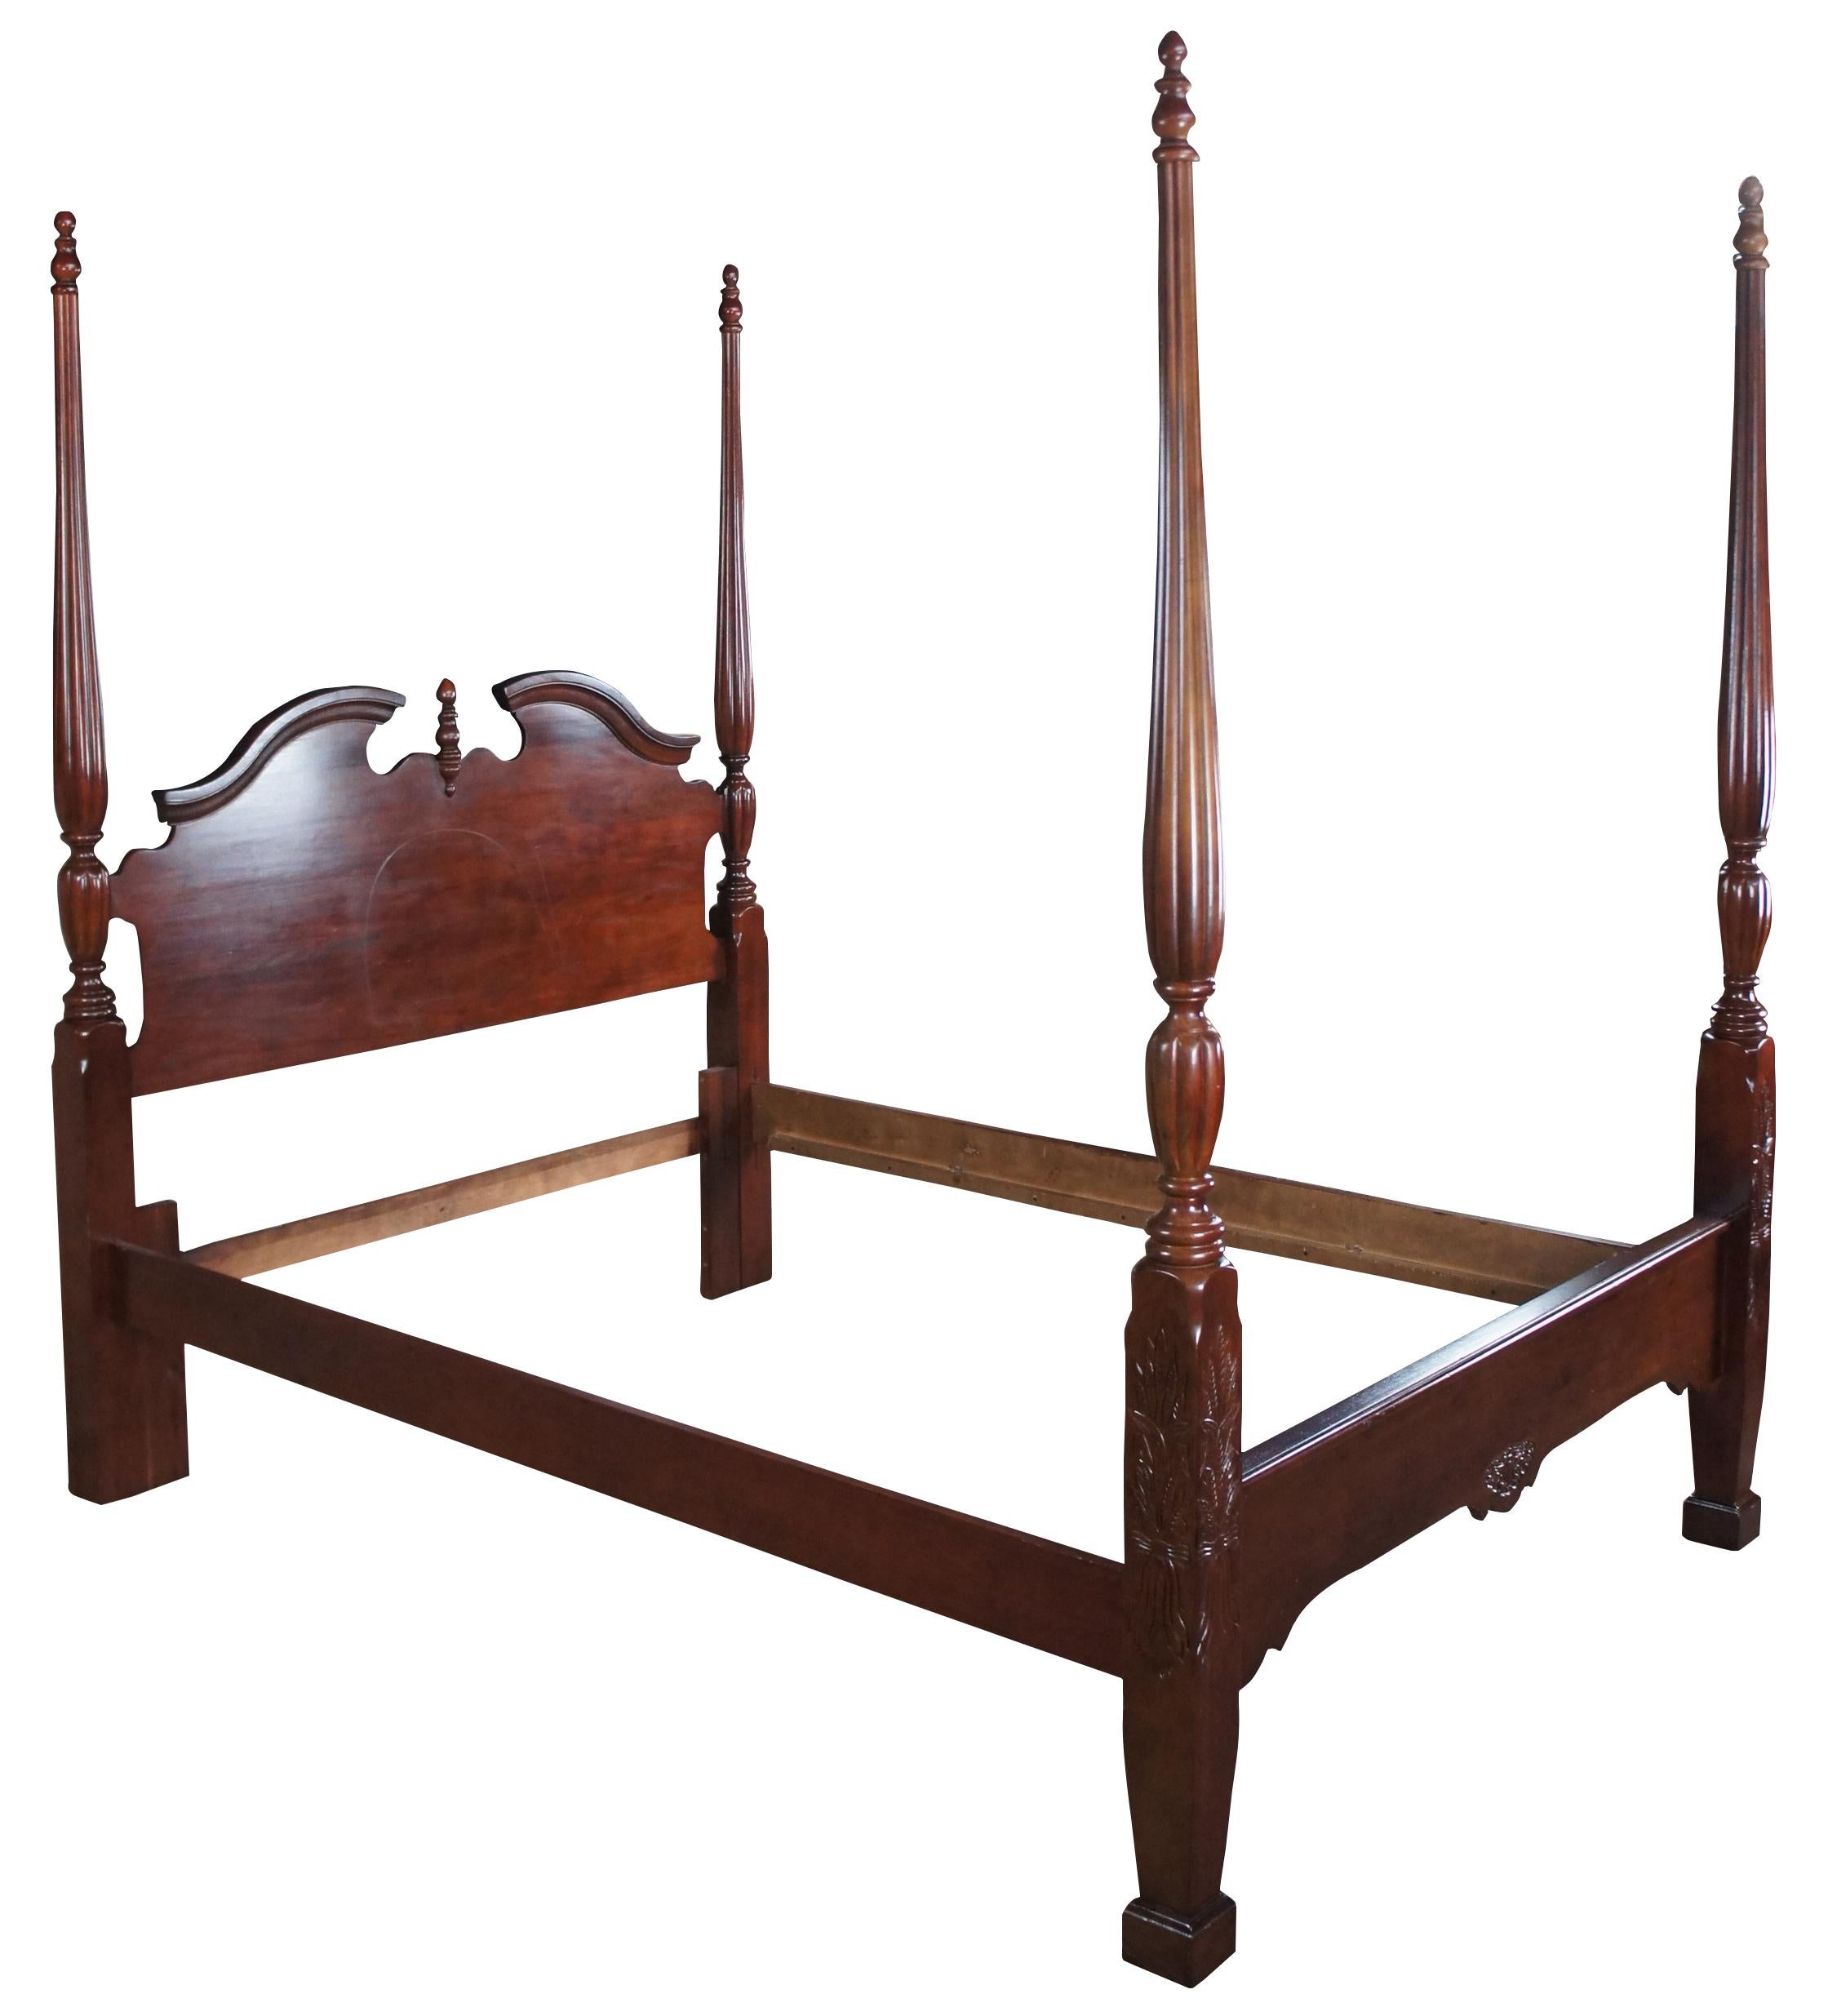 Kincaid Furniture General William Lenoire Limited Edition plantation style rice carved Full to Queen bed. Made from cherry with a warm brown finish, open pediment, reeded posters and carved details

Kincaid Furniture is based out of North